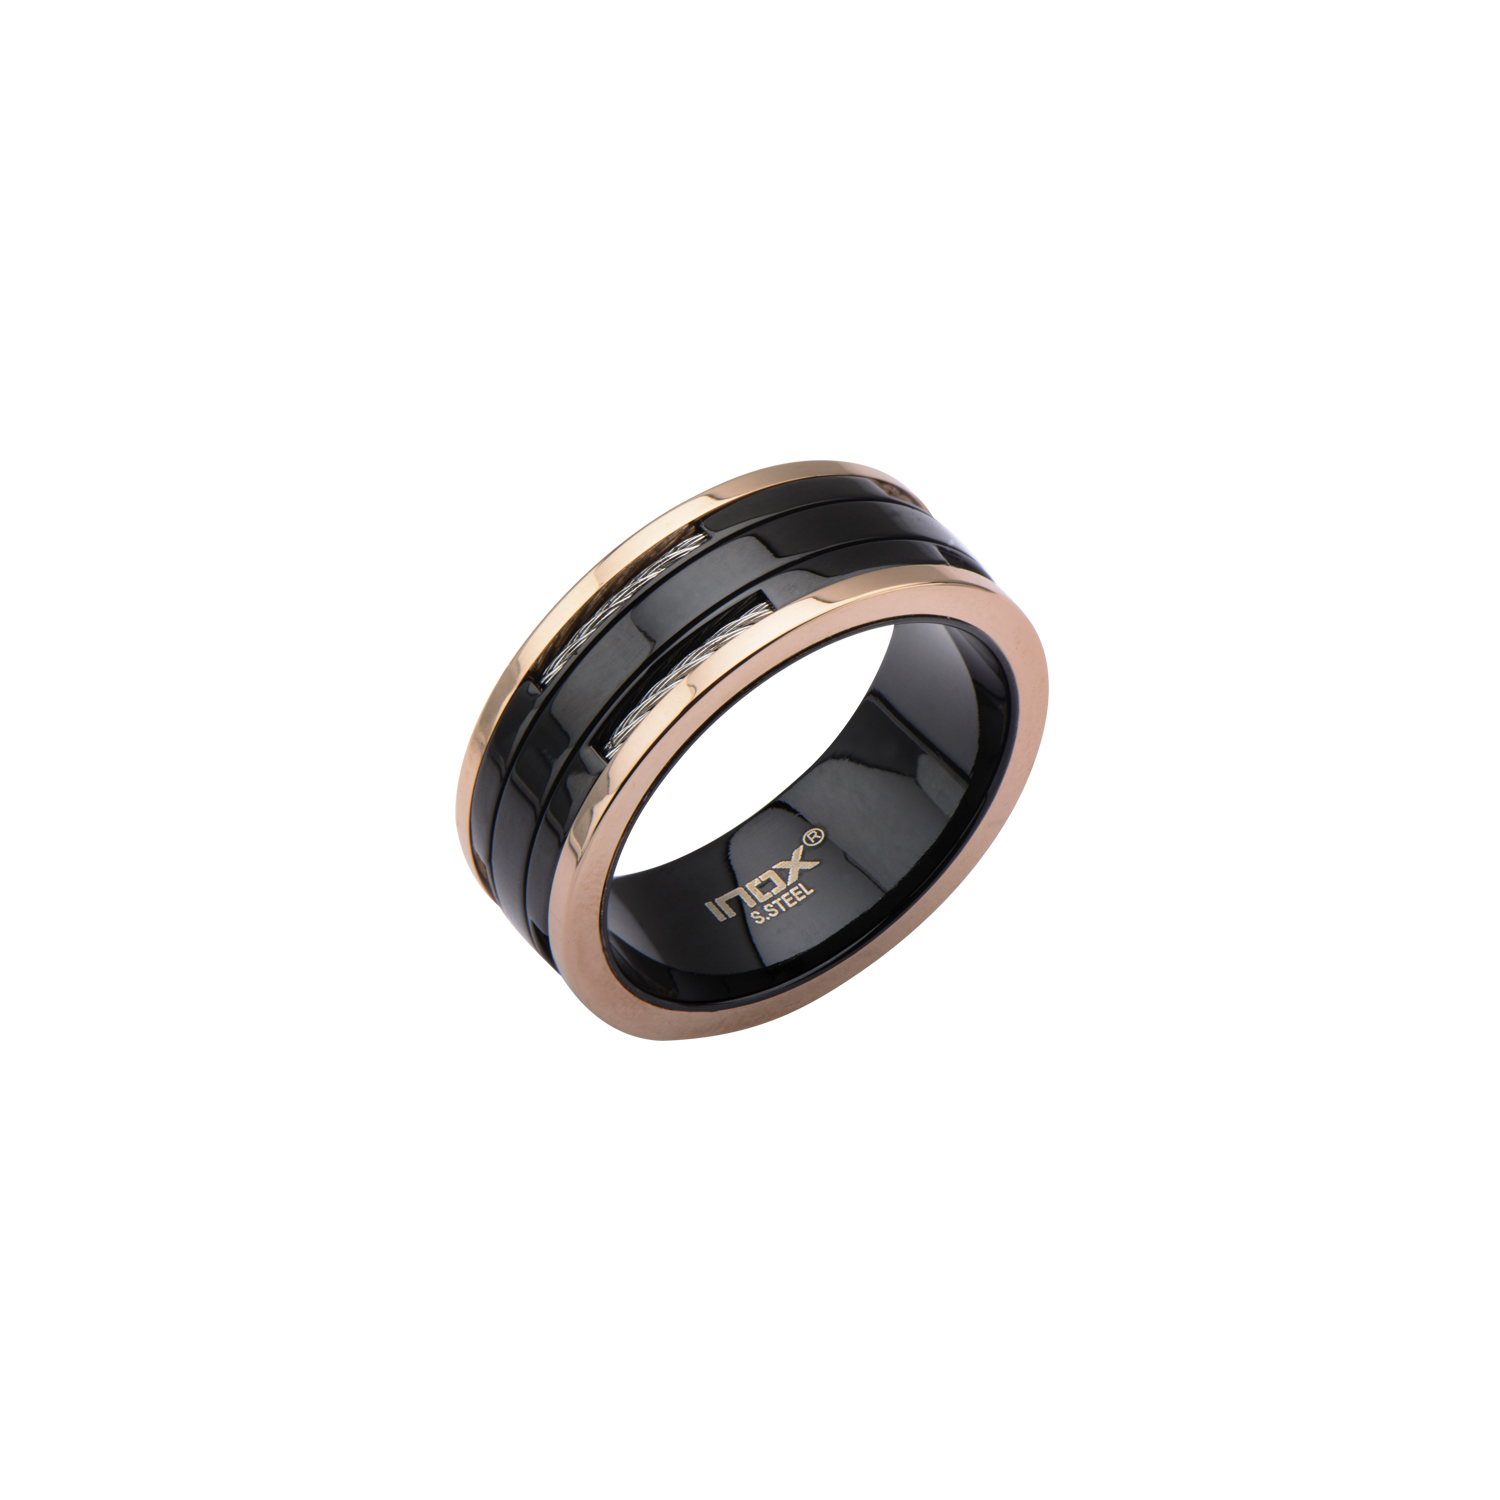 Black Plated and Rose Gold Plated Ring with Inlayed Cable Lewis Jewelers, Inc. Ansonia, CT